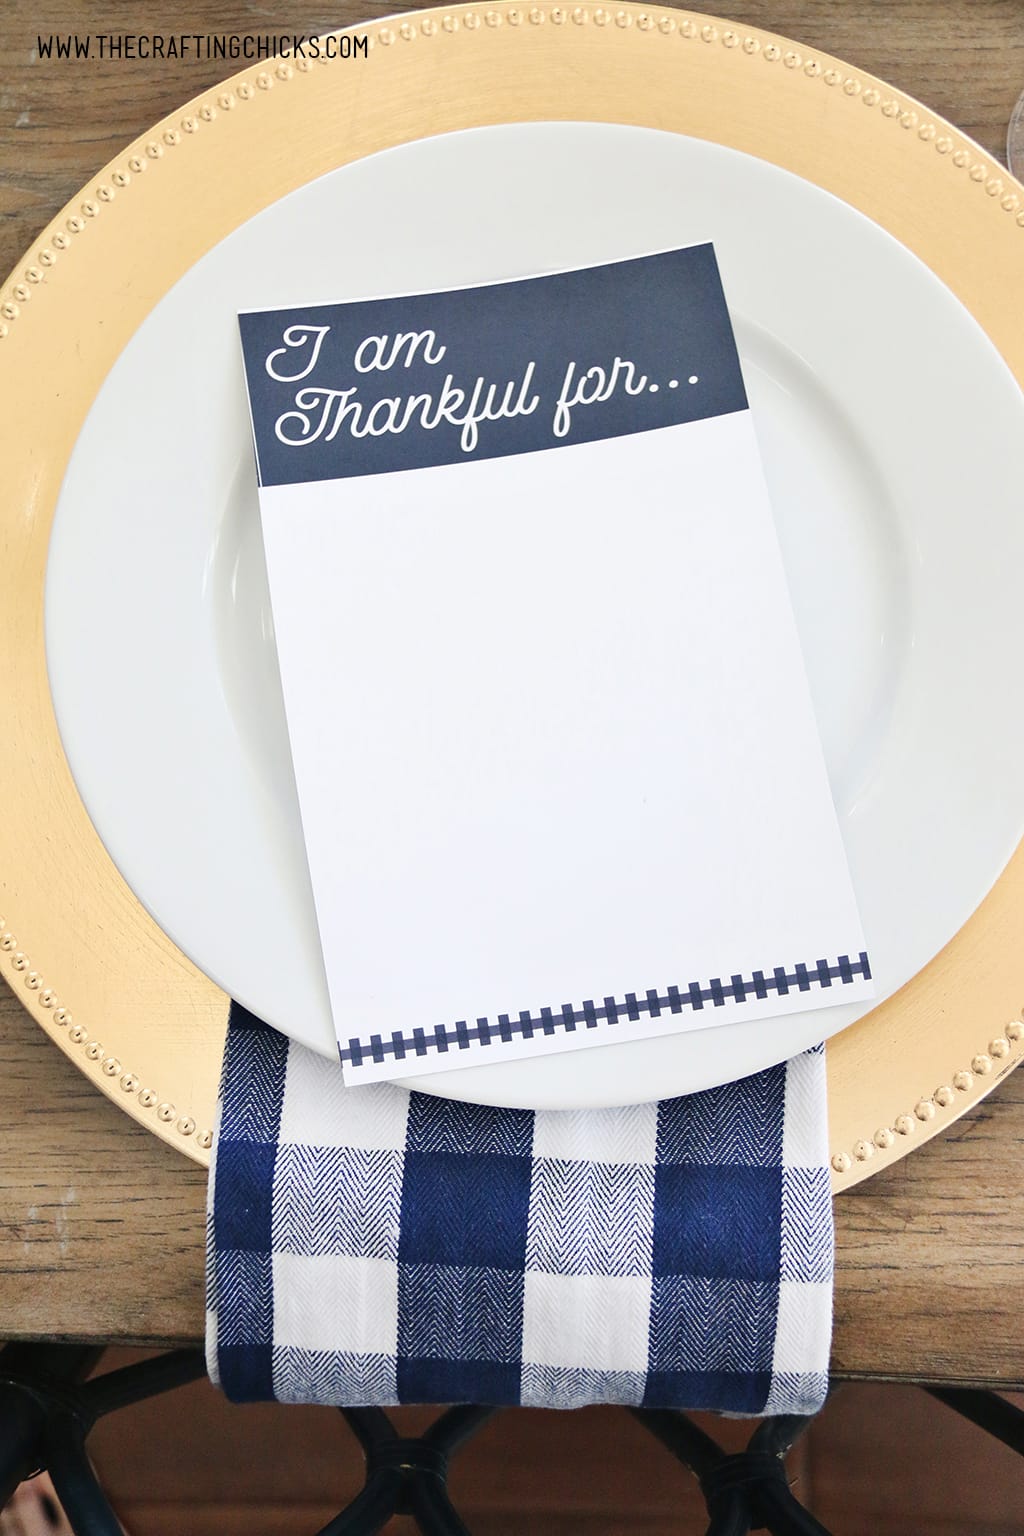 I am Thankful for printable cards on a thanksgiving table.